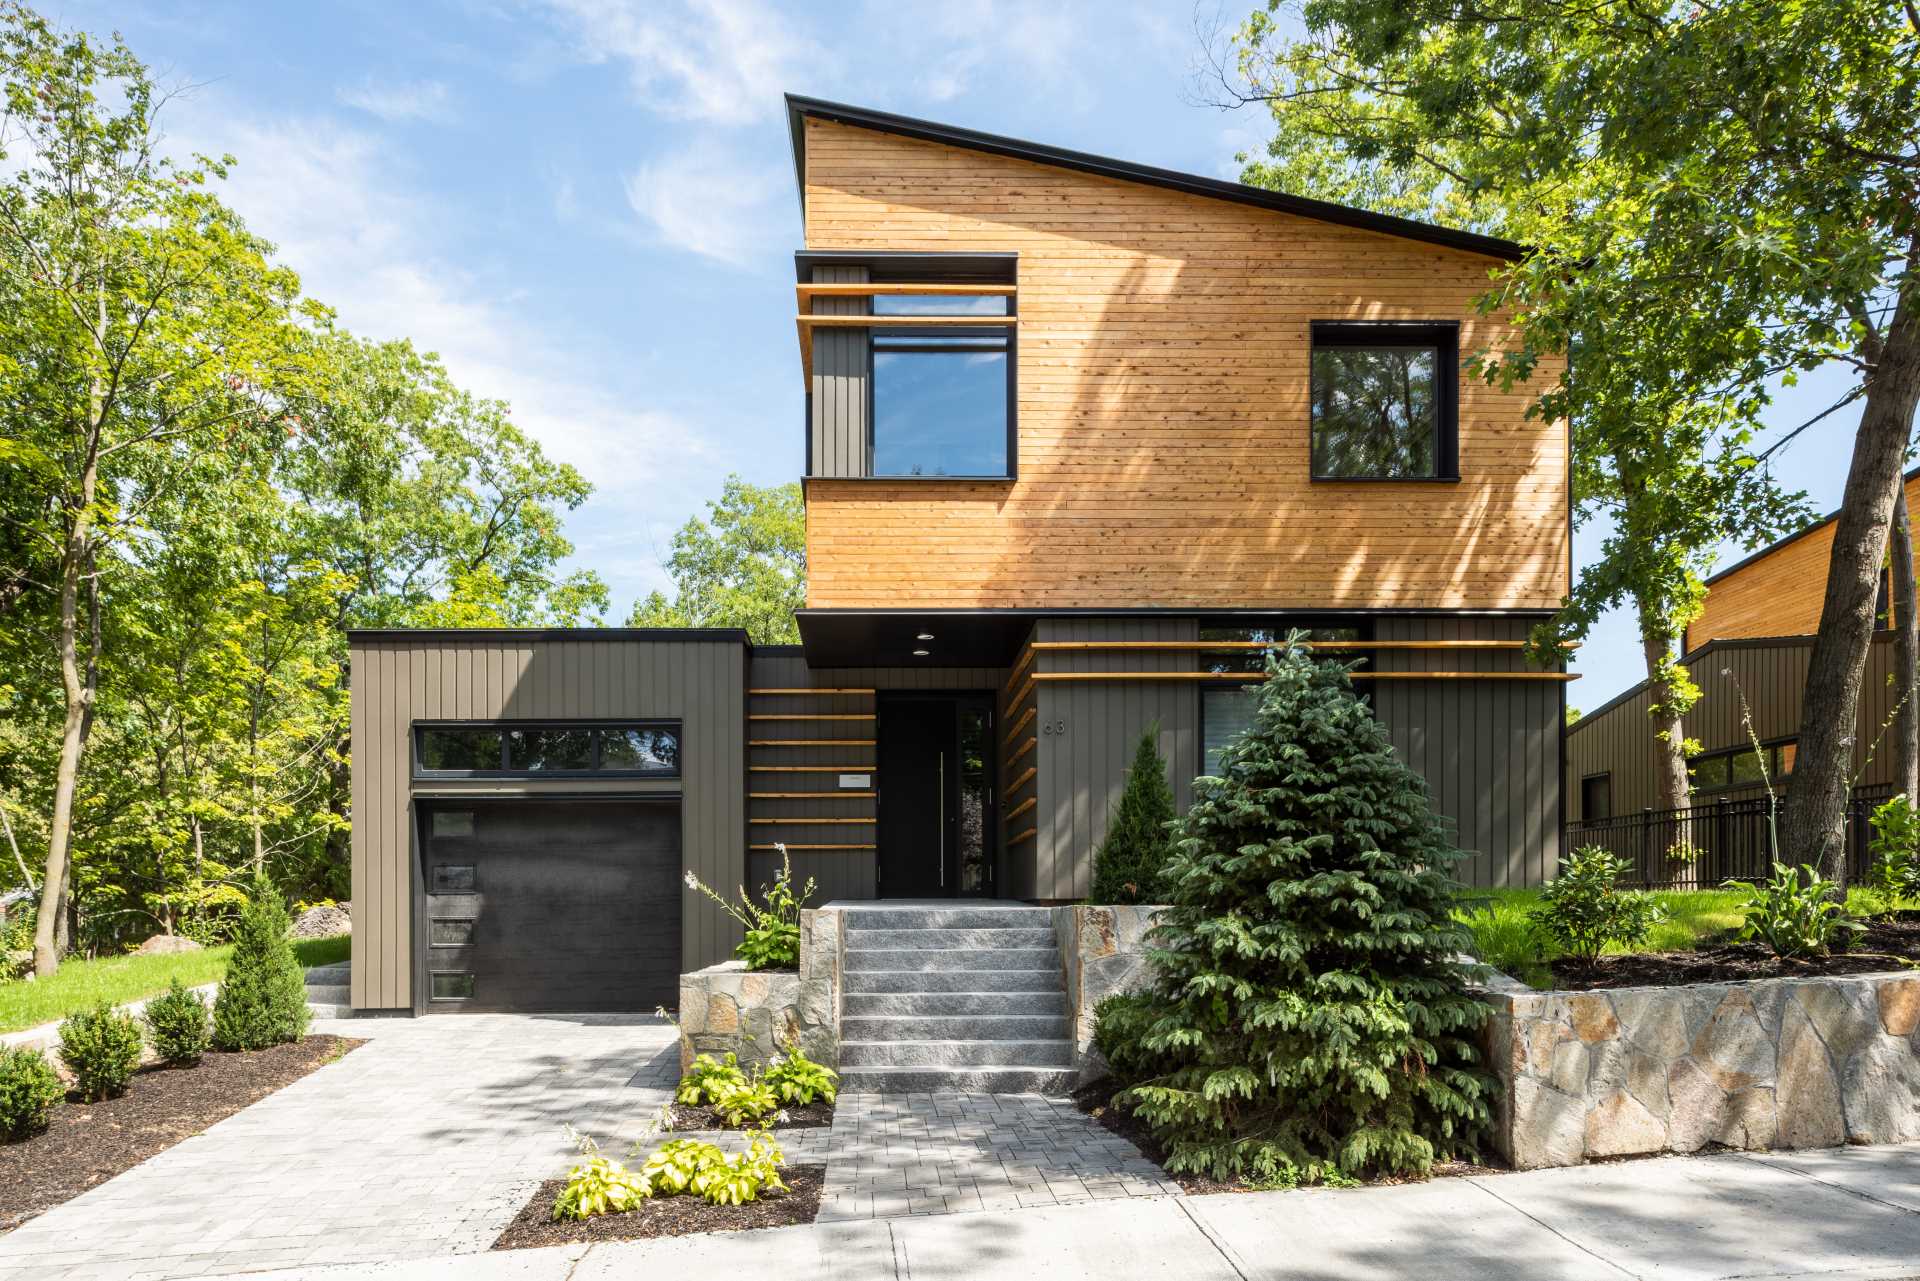 A modern home features an angled roof line, a clear-finished white cedar siding on the upper volume, and a painted siding made from materials recovered from manufacturing by-products on the lower volume.